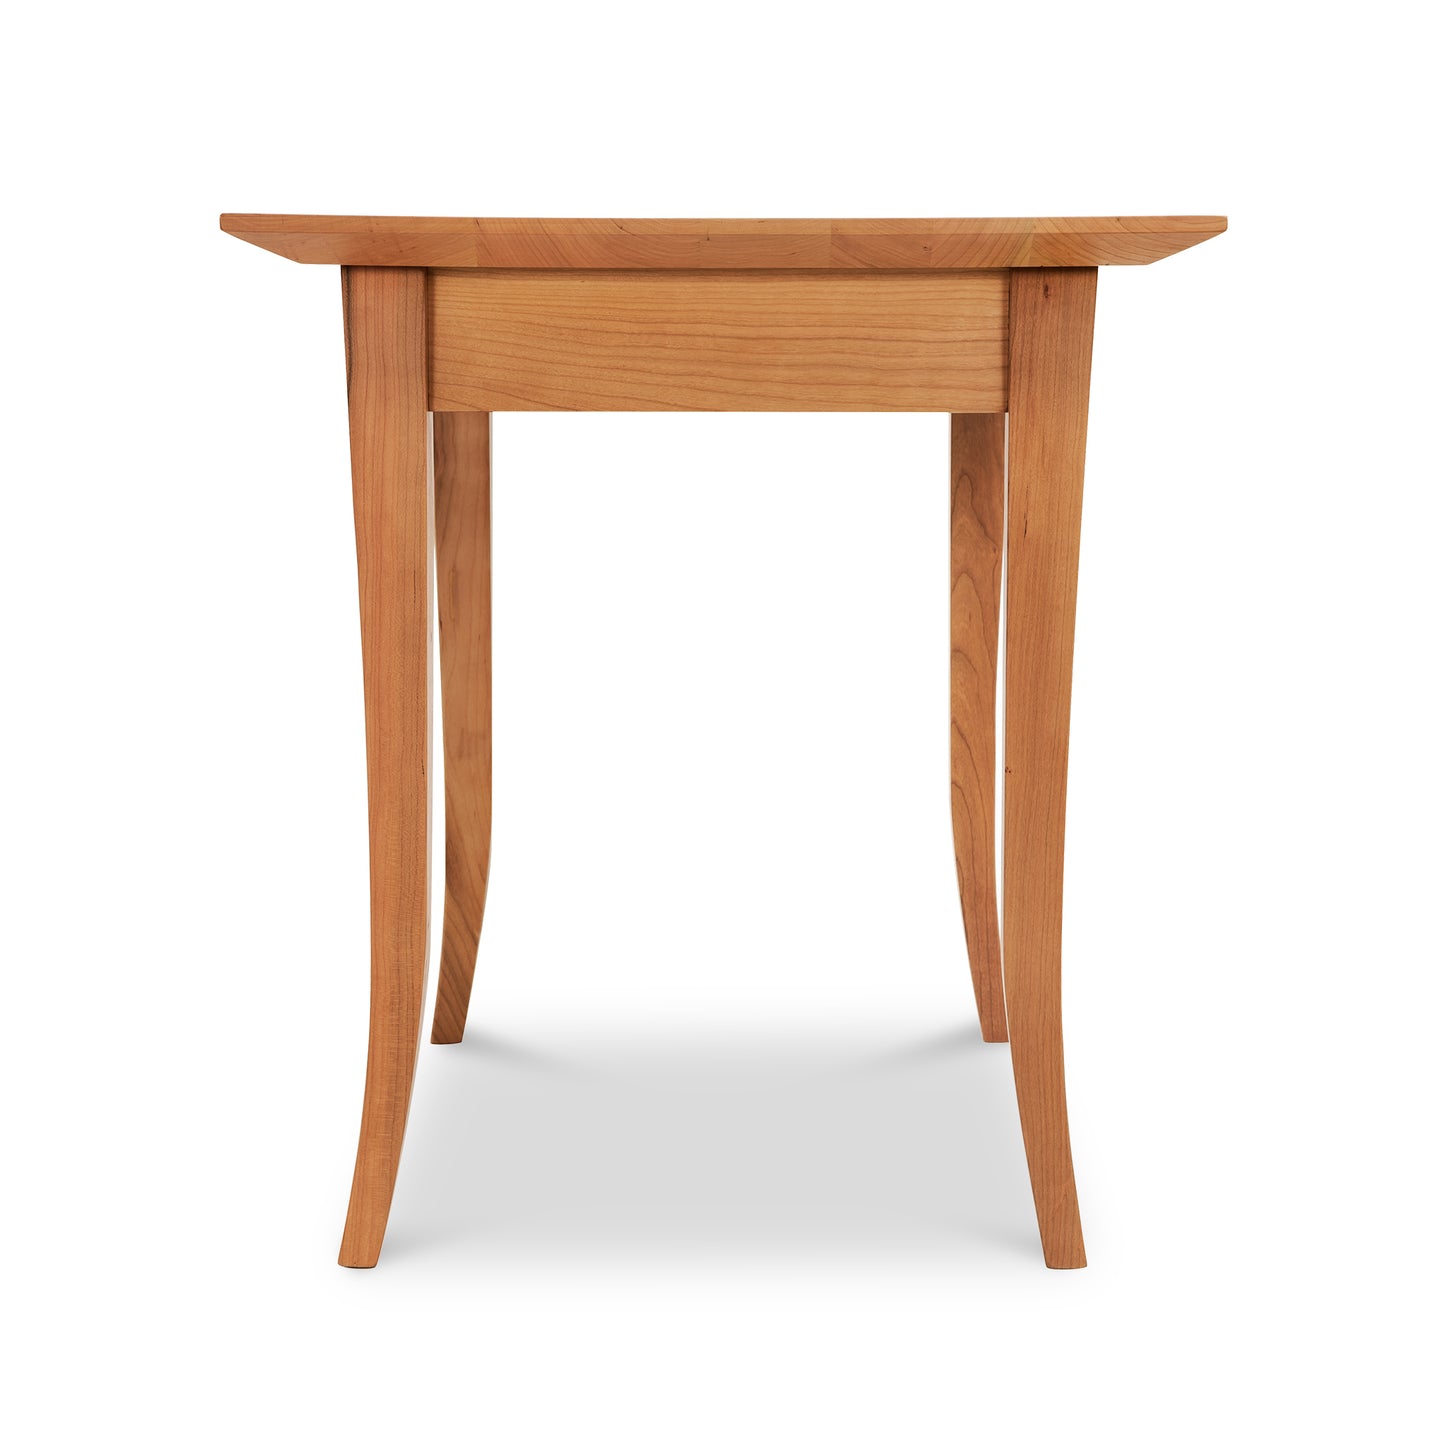 A small wooden Classic Shaker Flare Leg End Table by Lyndon Furniture.